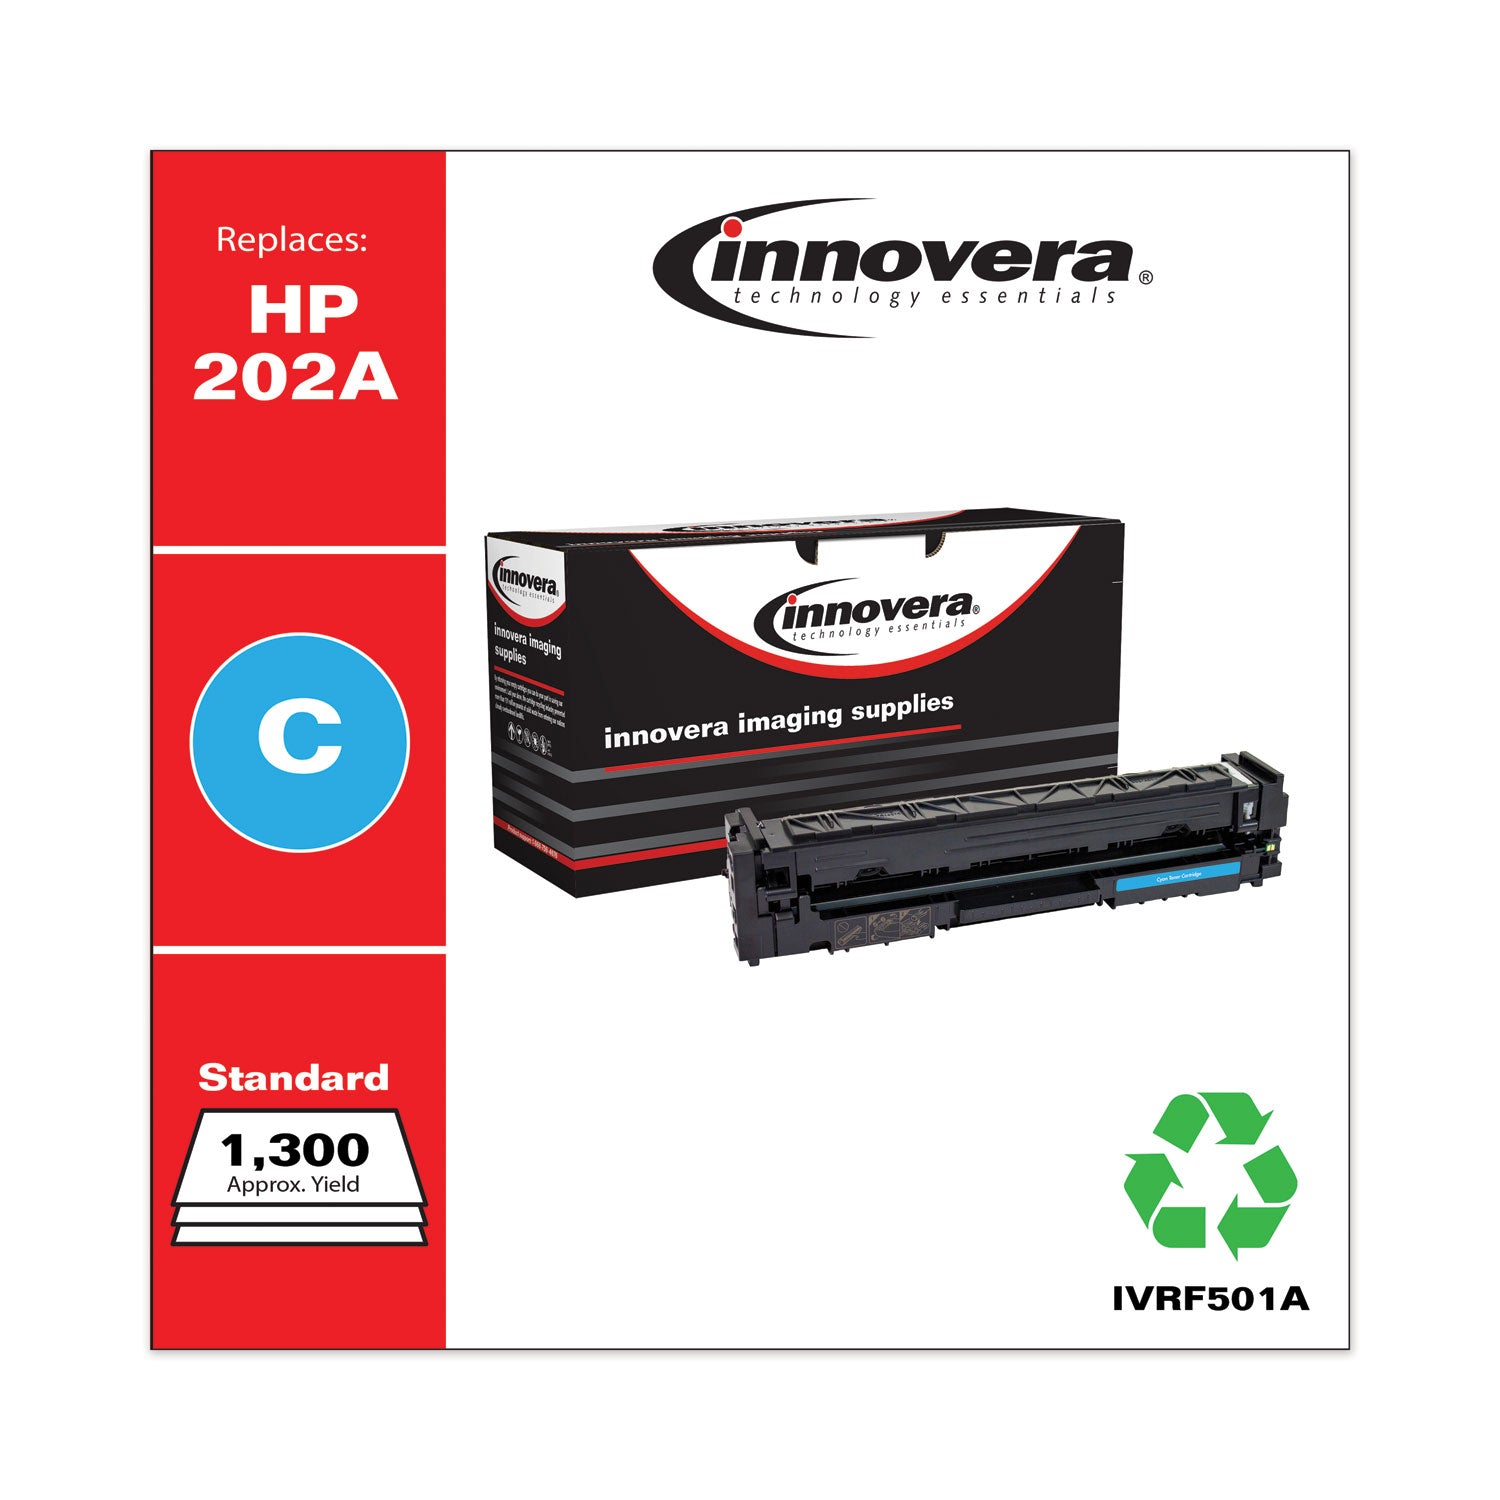 remanufactured-cyan-toner-replacement-for-202a-cf501a-1300-page-yield-ships-in-1-3-business-days_ivrf501a - 2